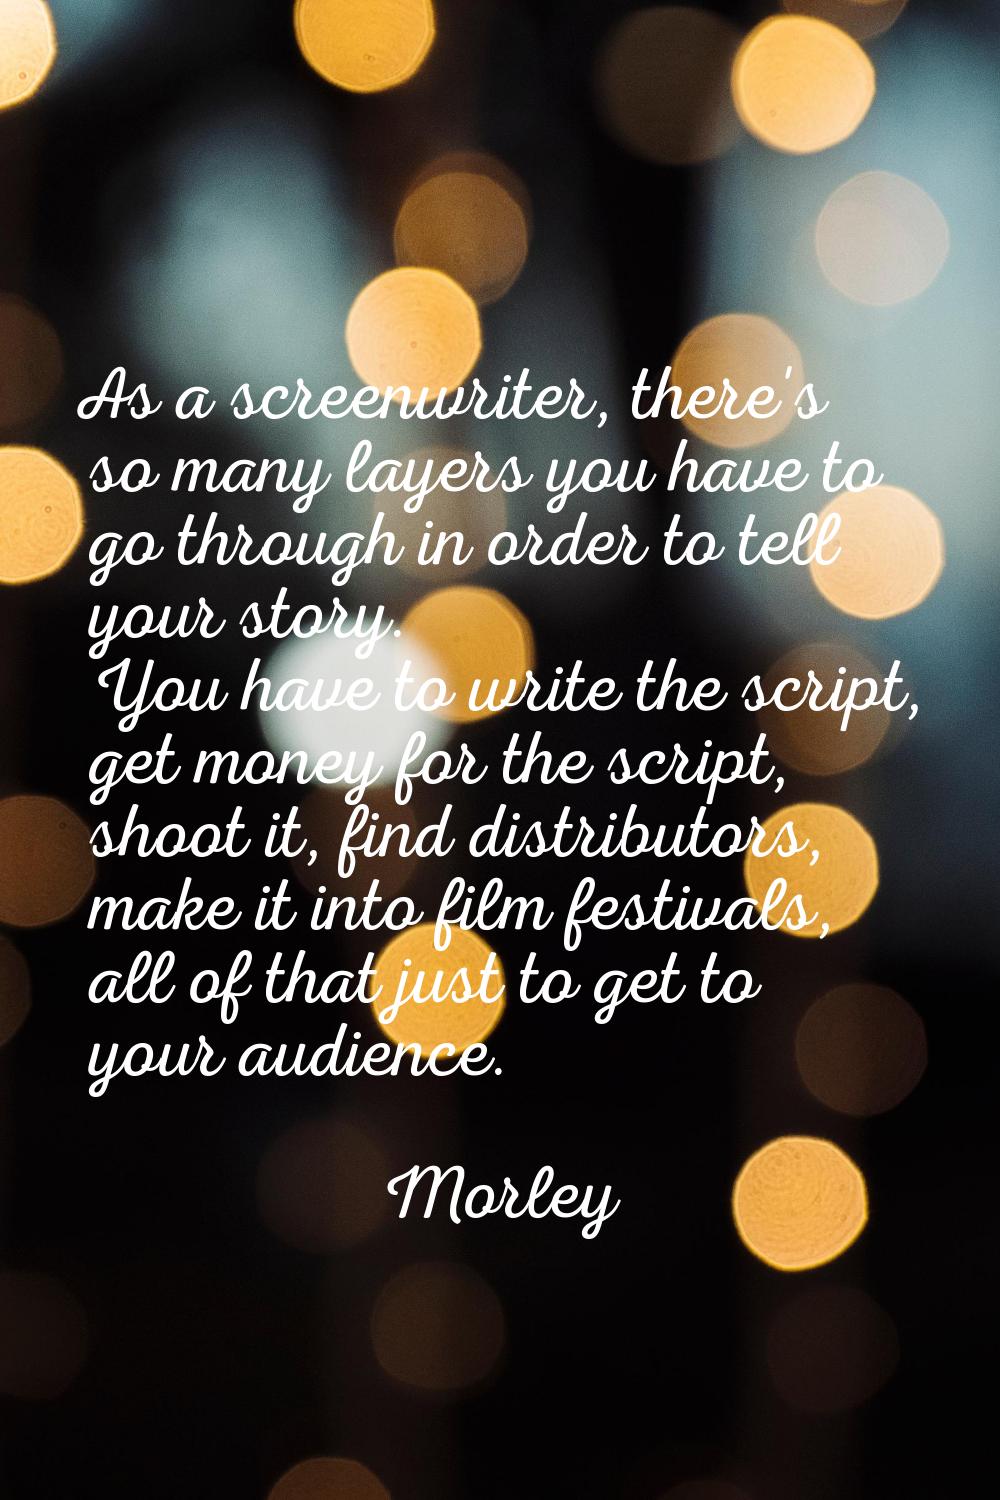 As a screenwriter, there's so many layers you have to go through in order to tell your story. You h